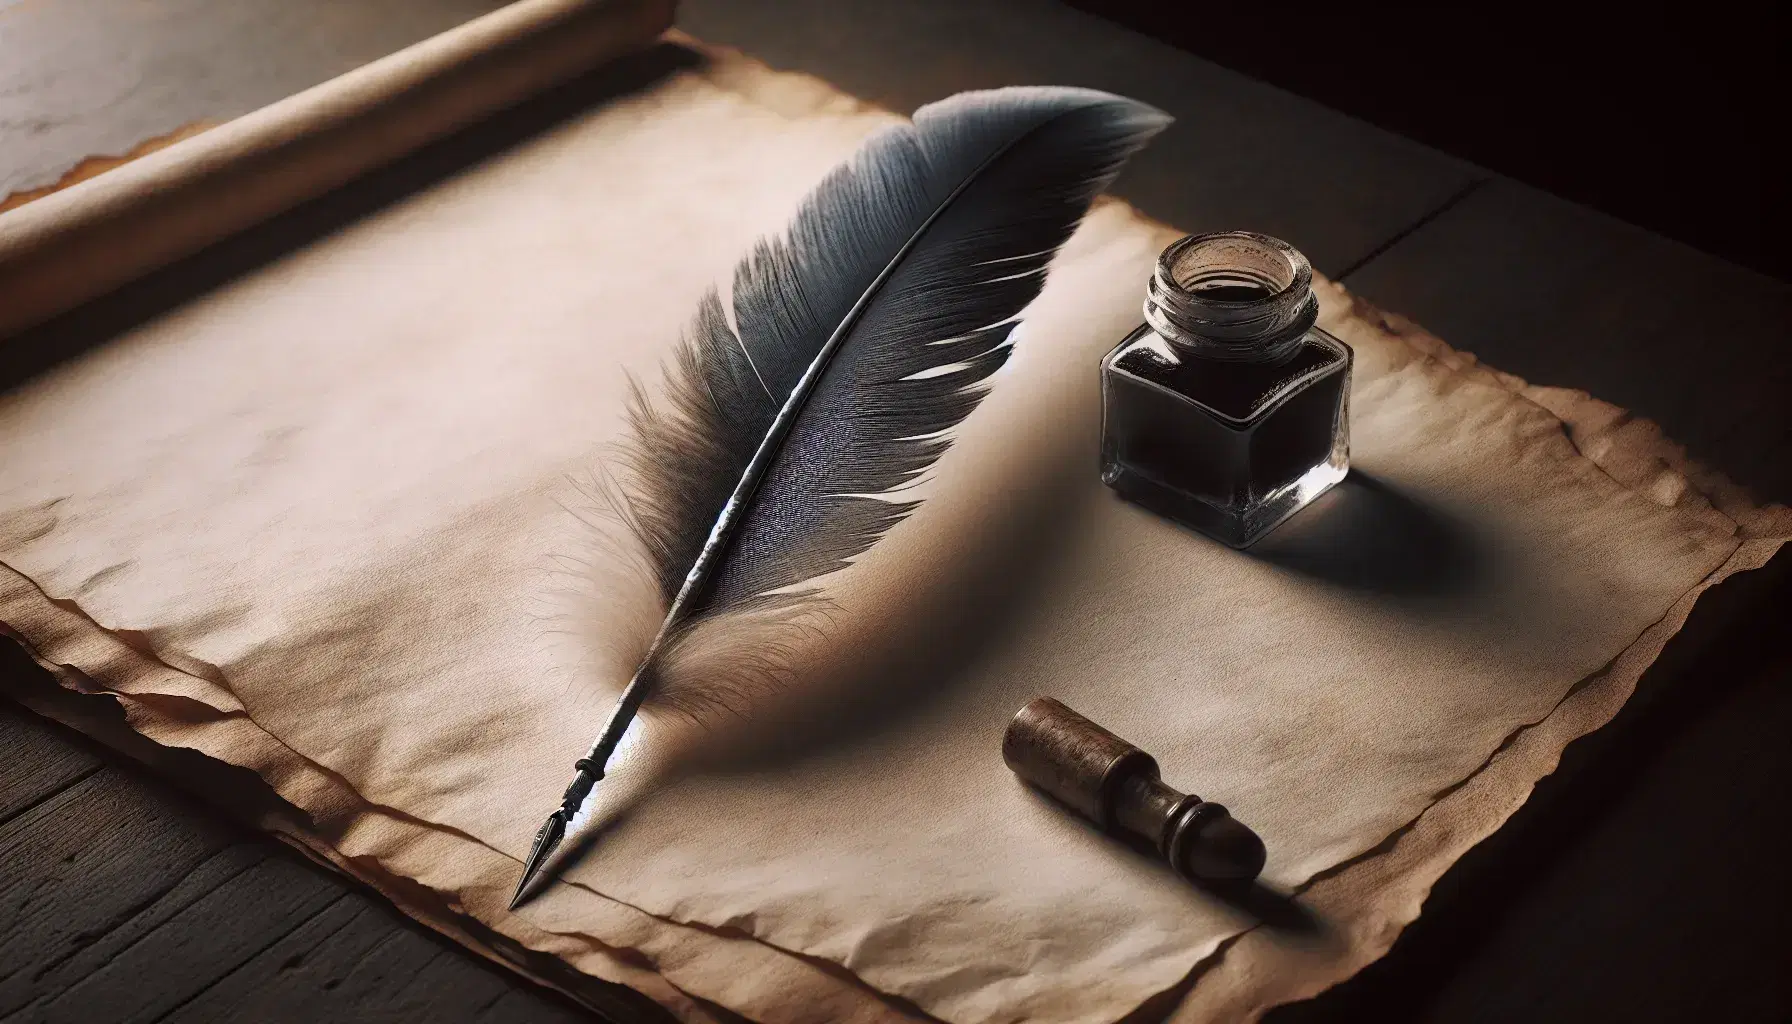 Quill pen and inkwell beside blank parchment on a wooden table, evoking a vintage writing scene with natural lighting and no visible text.